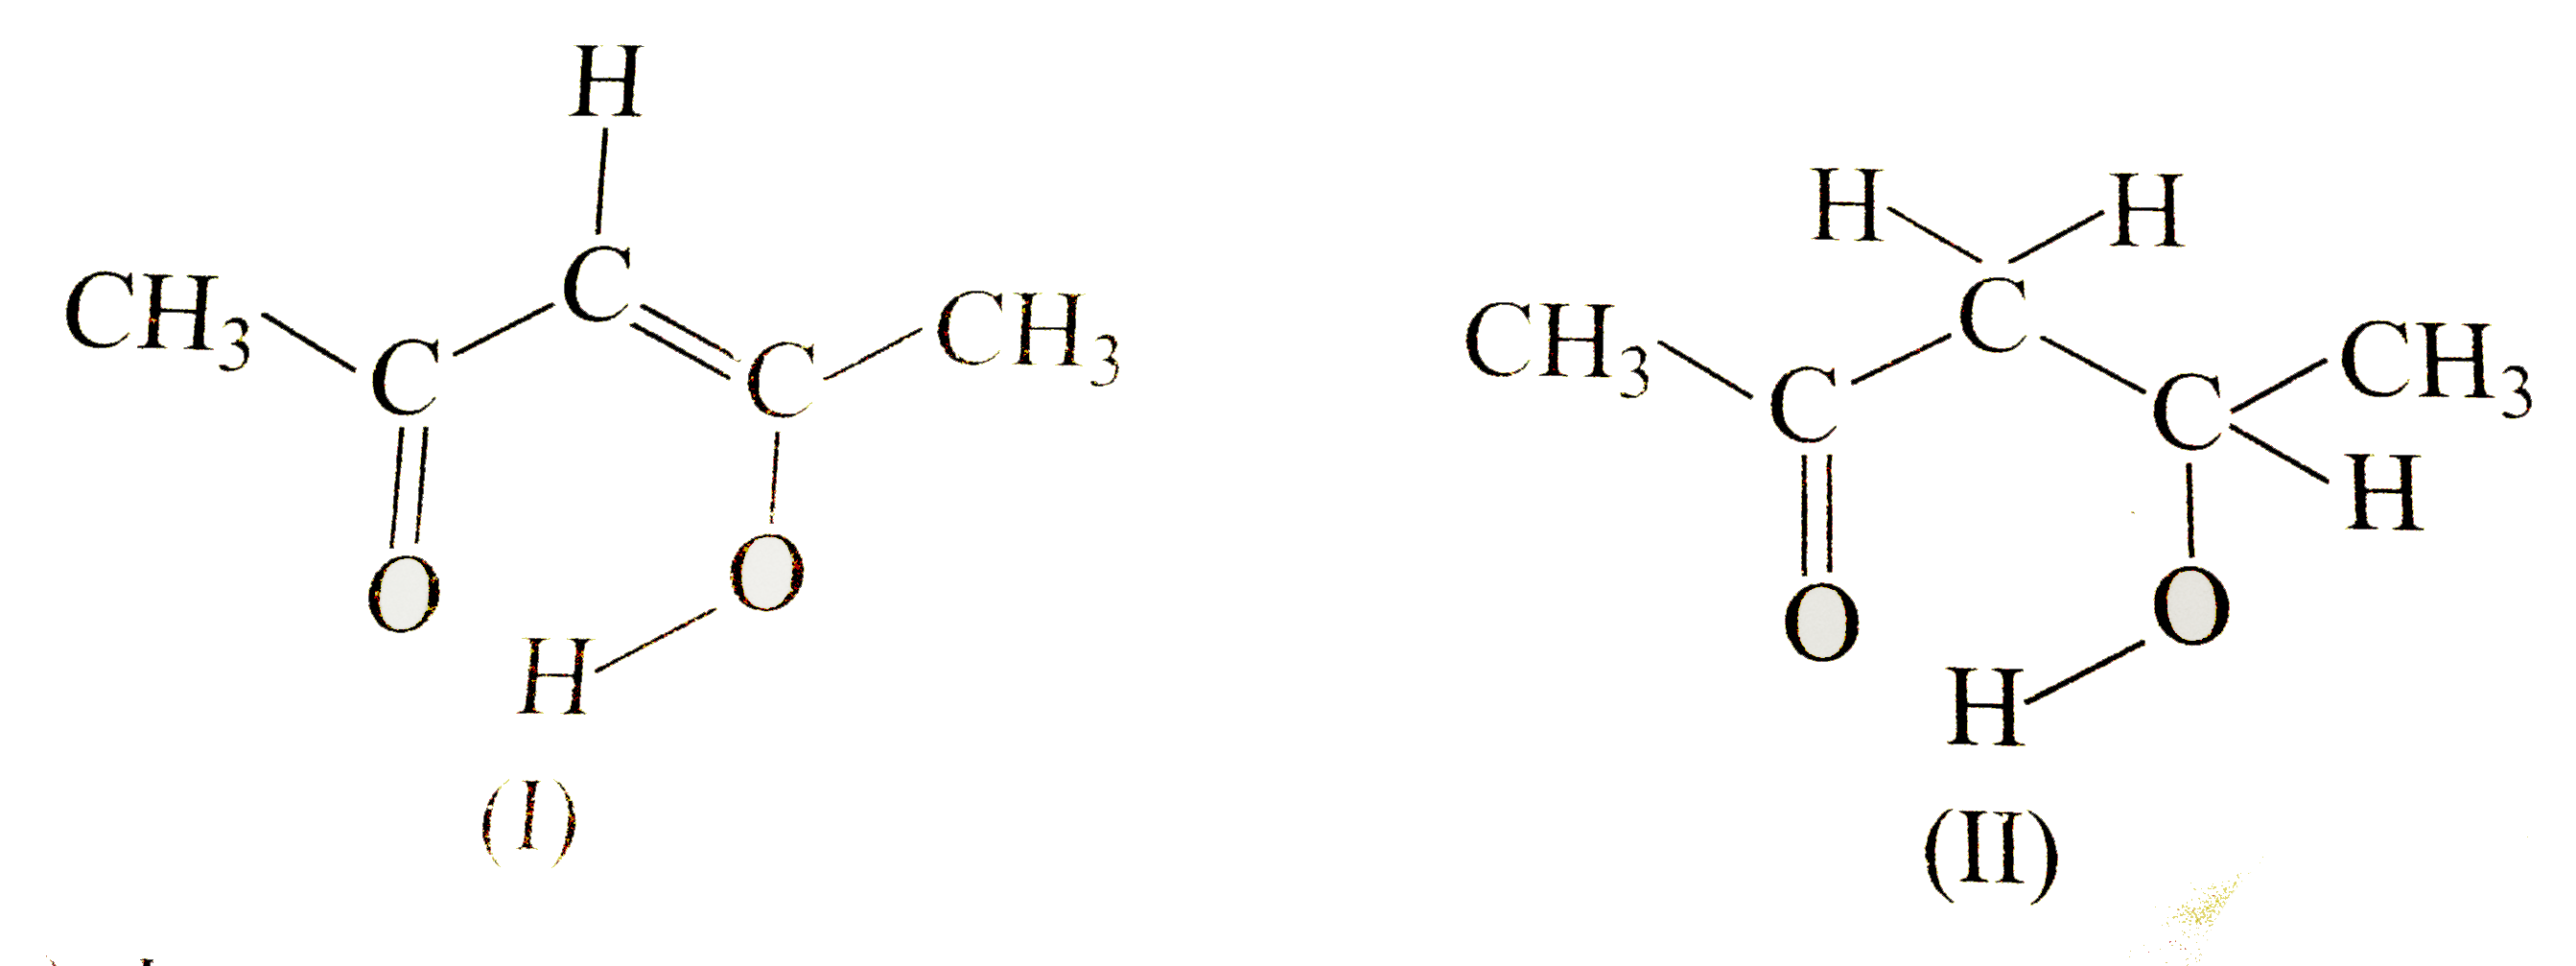 Two molecules indicated below are capable to intramolecular H-bonding. Which is likely to form more stable hydrogen bonds?